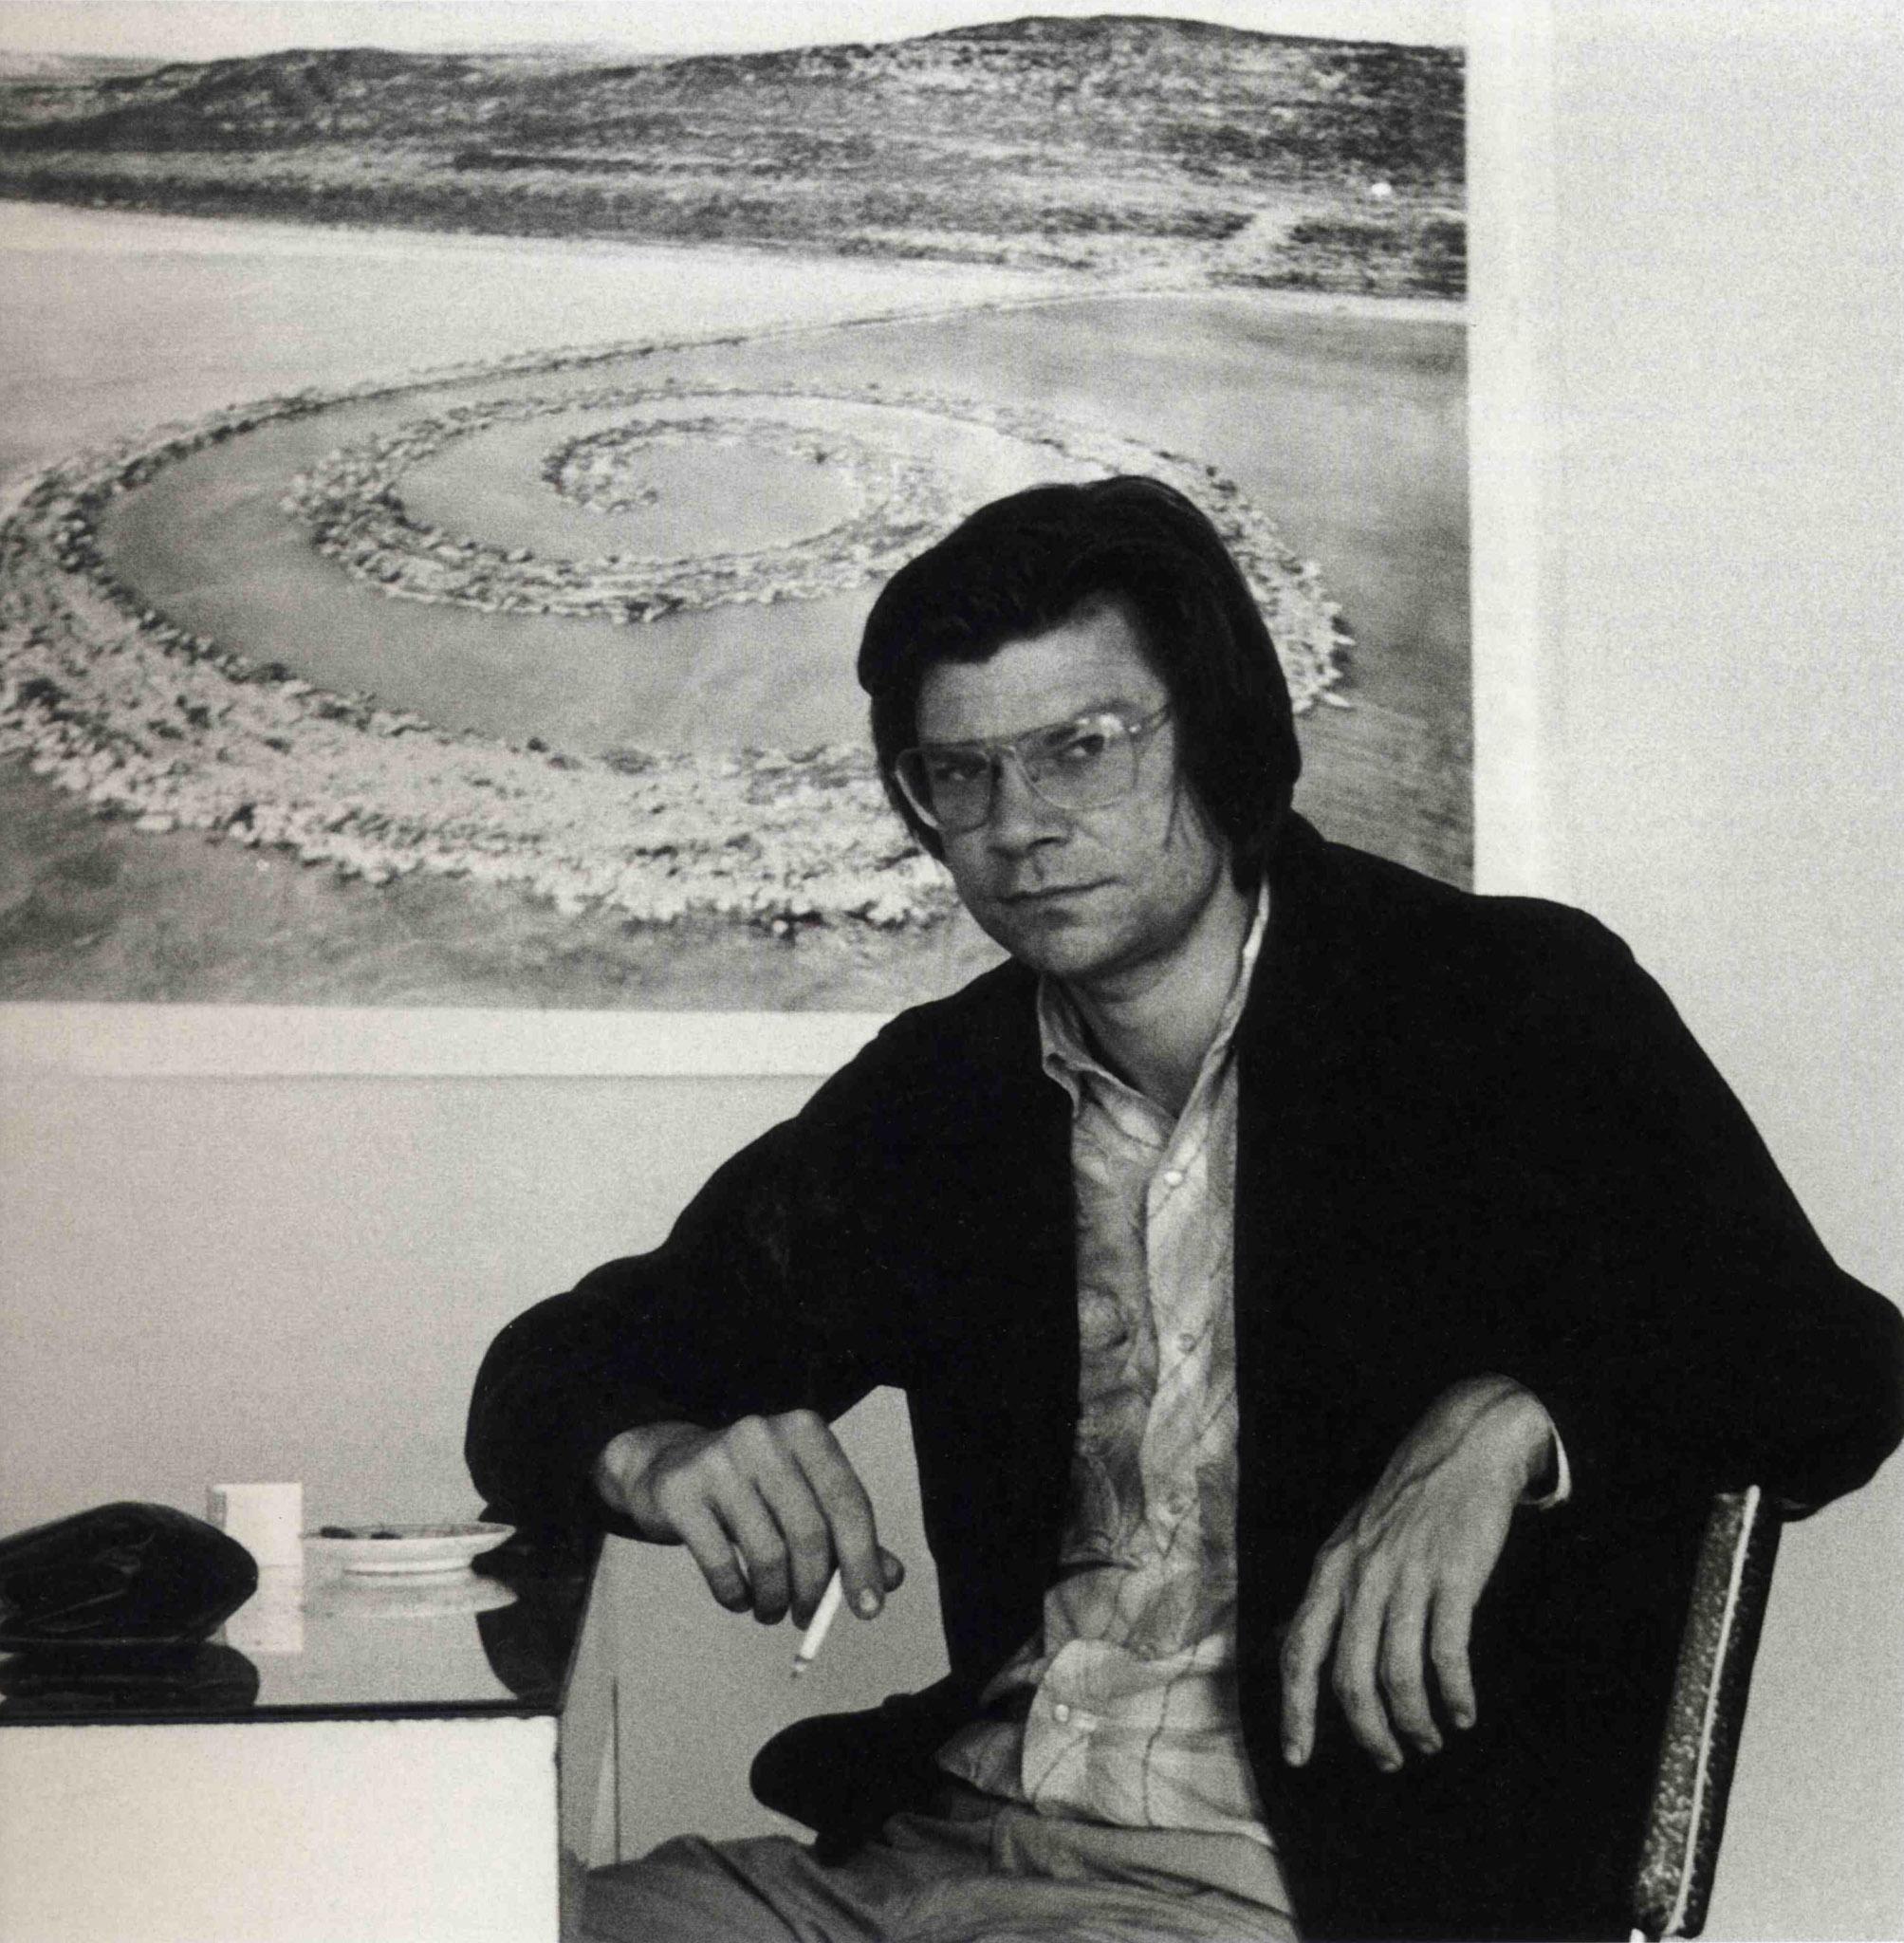 Robert Smithson sitting smoking a cigarette at a table